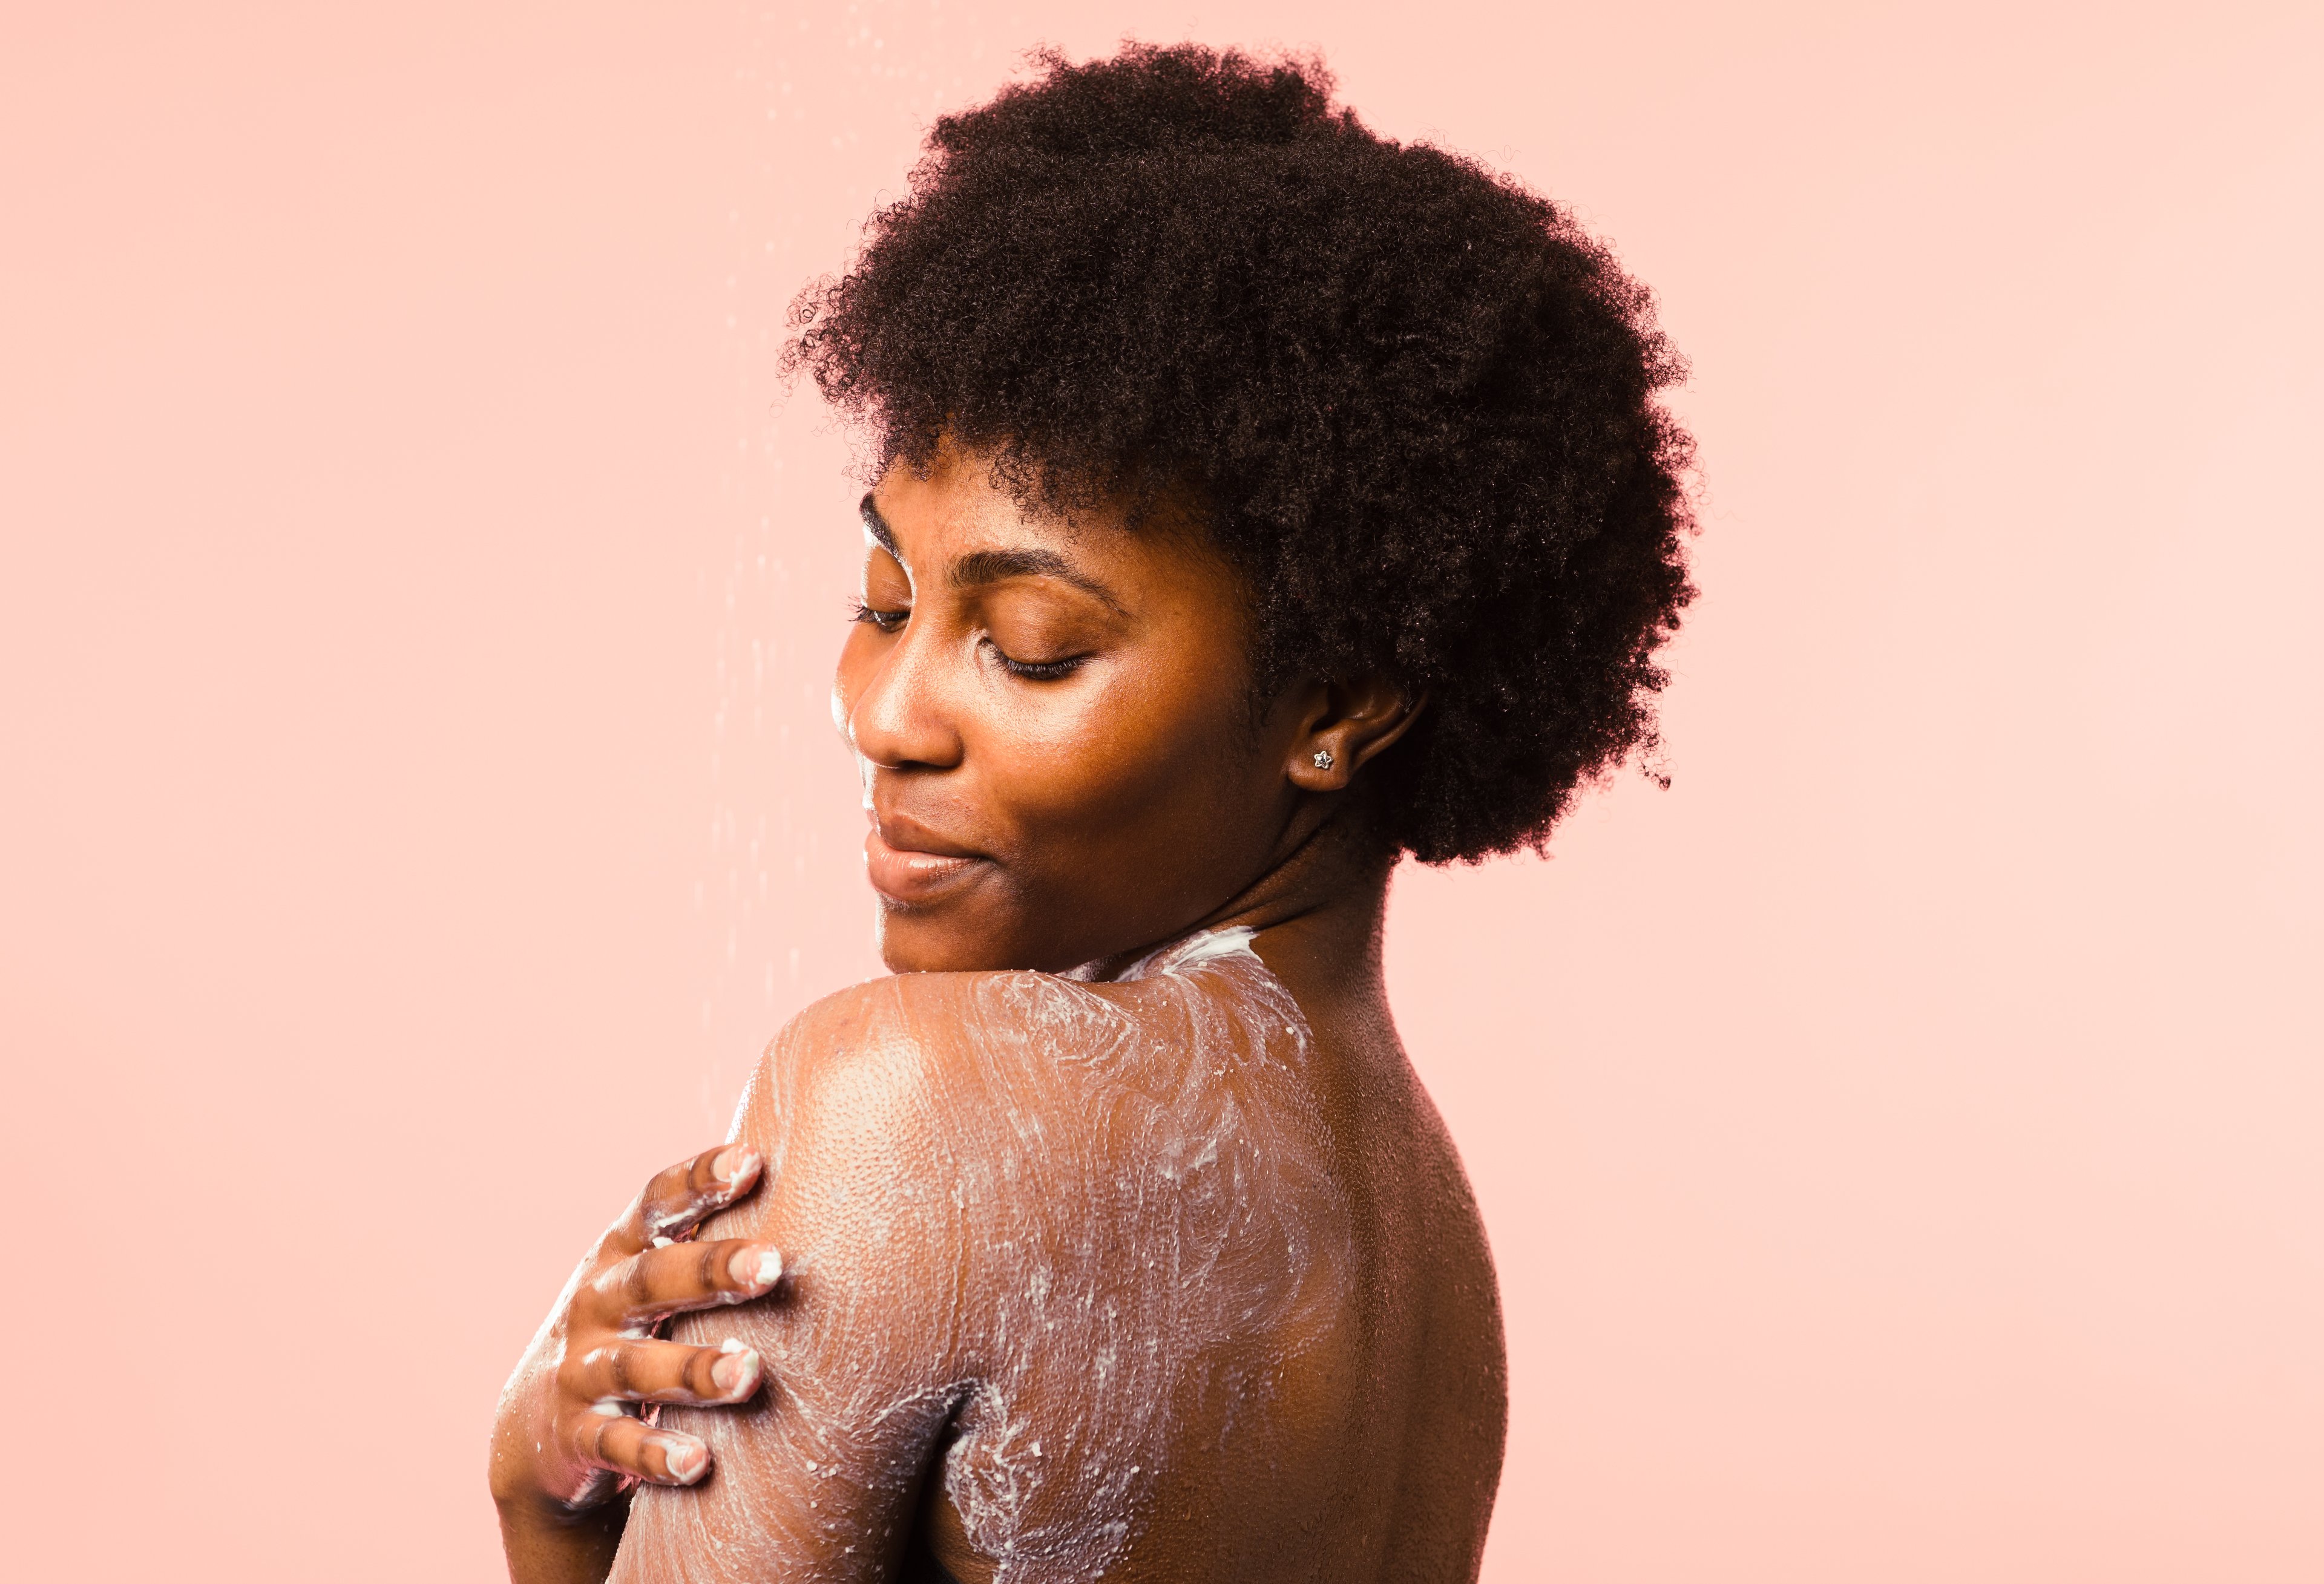 A person stands with at an angle to show the white Ocean Salt exfoliator rubbed on their shoulder and back